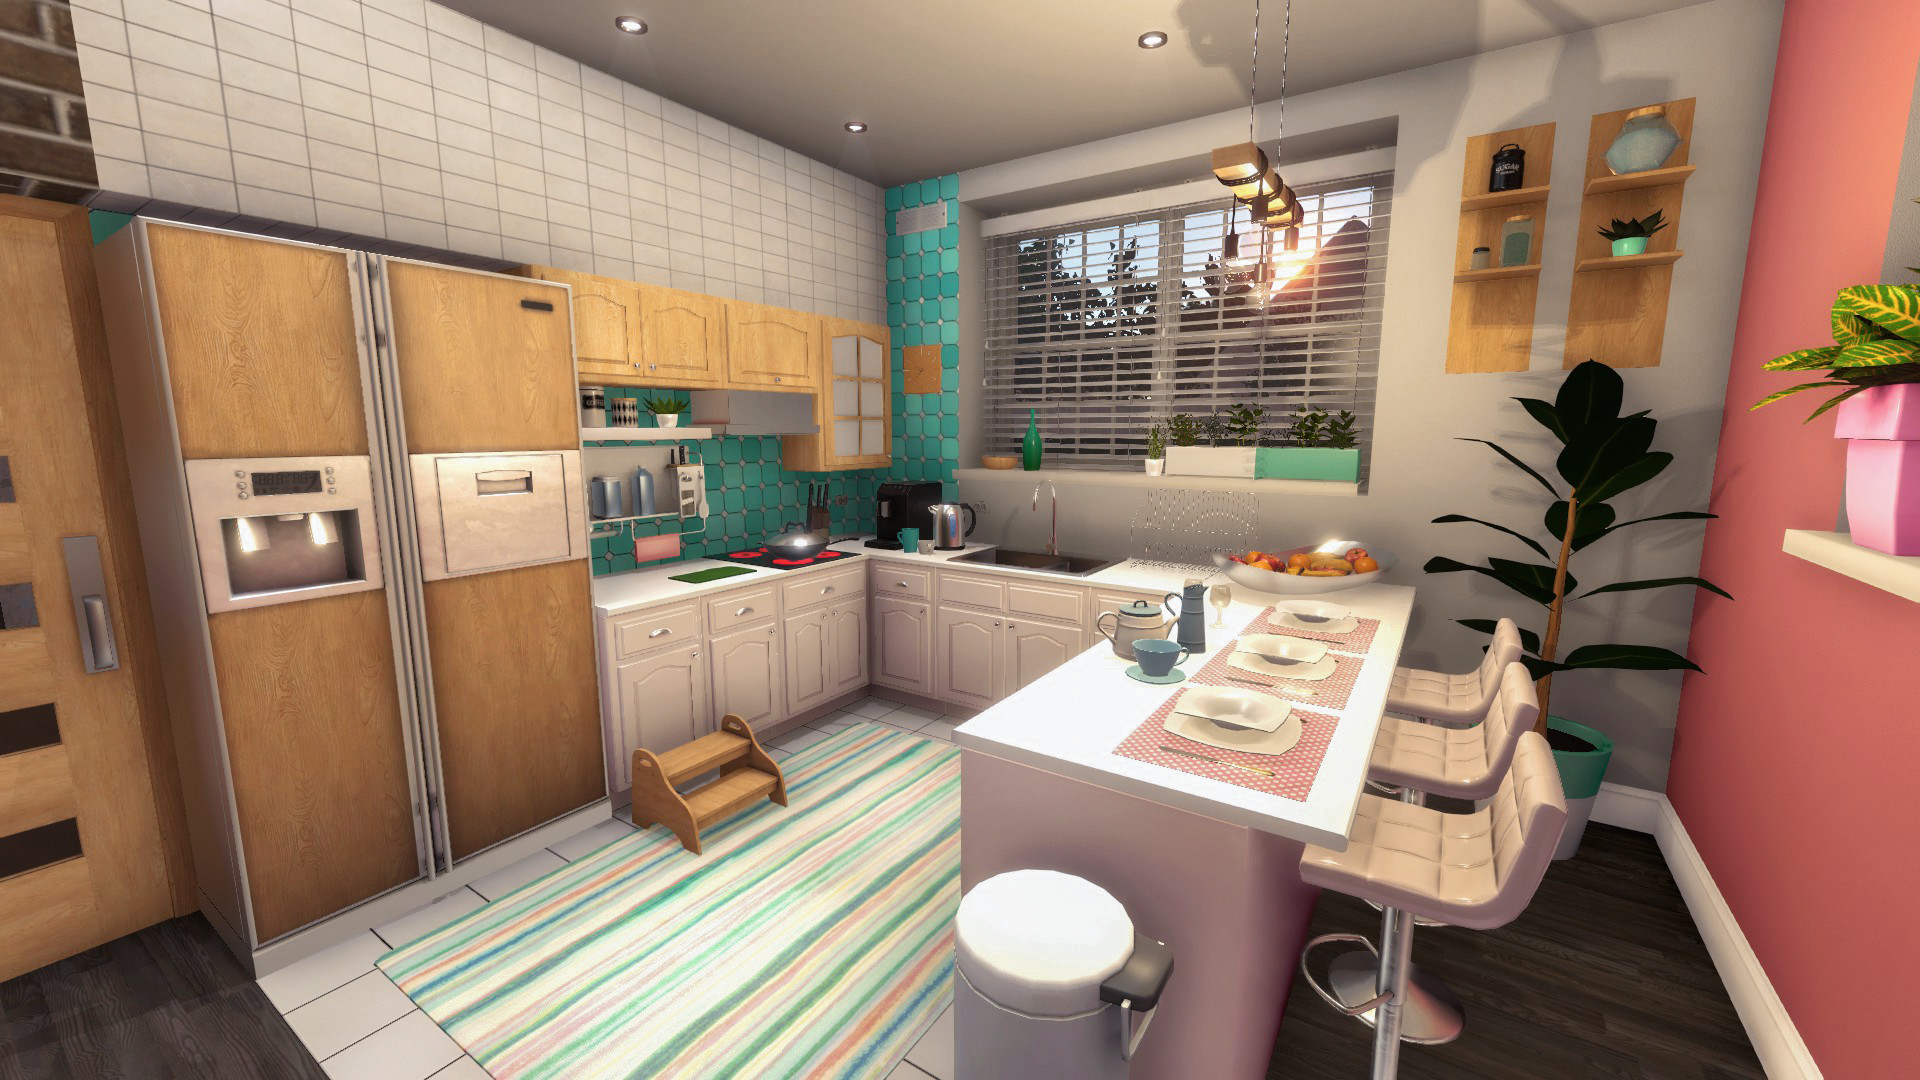 A fully decorated and furnished kitchen.